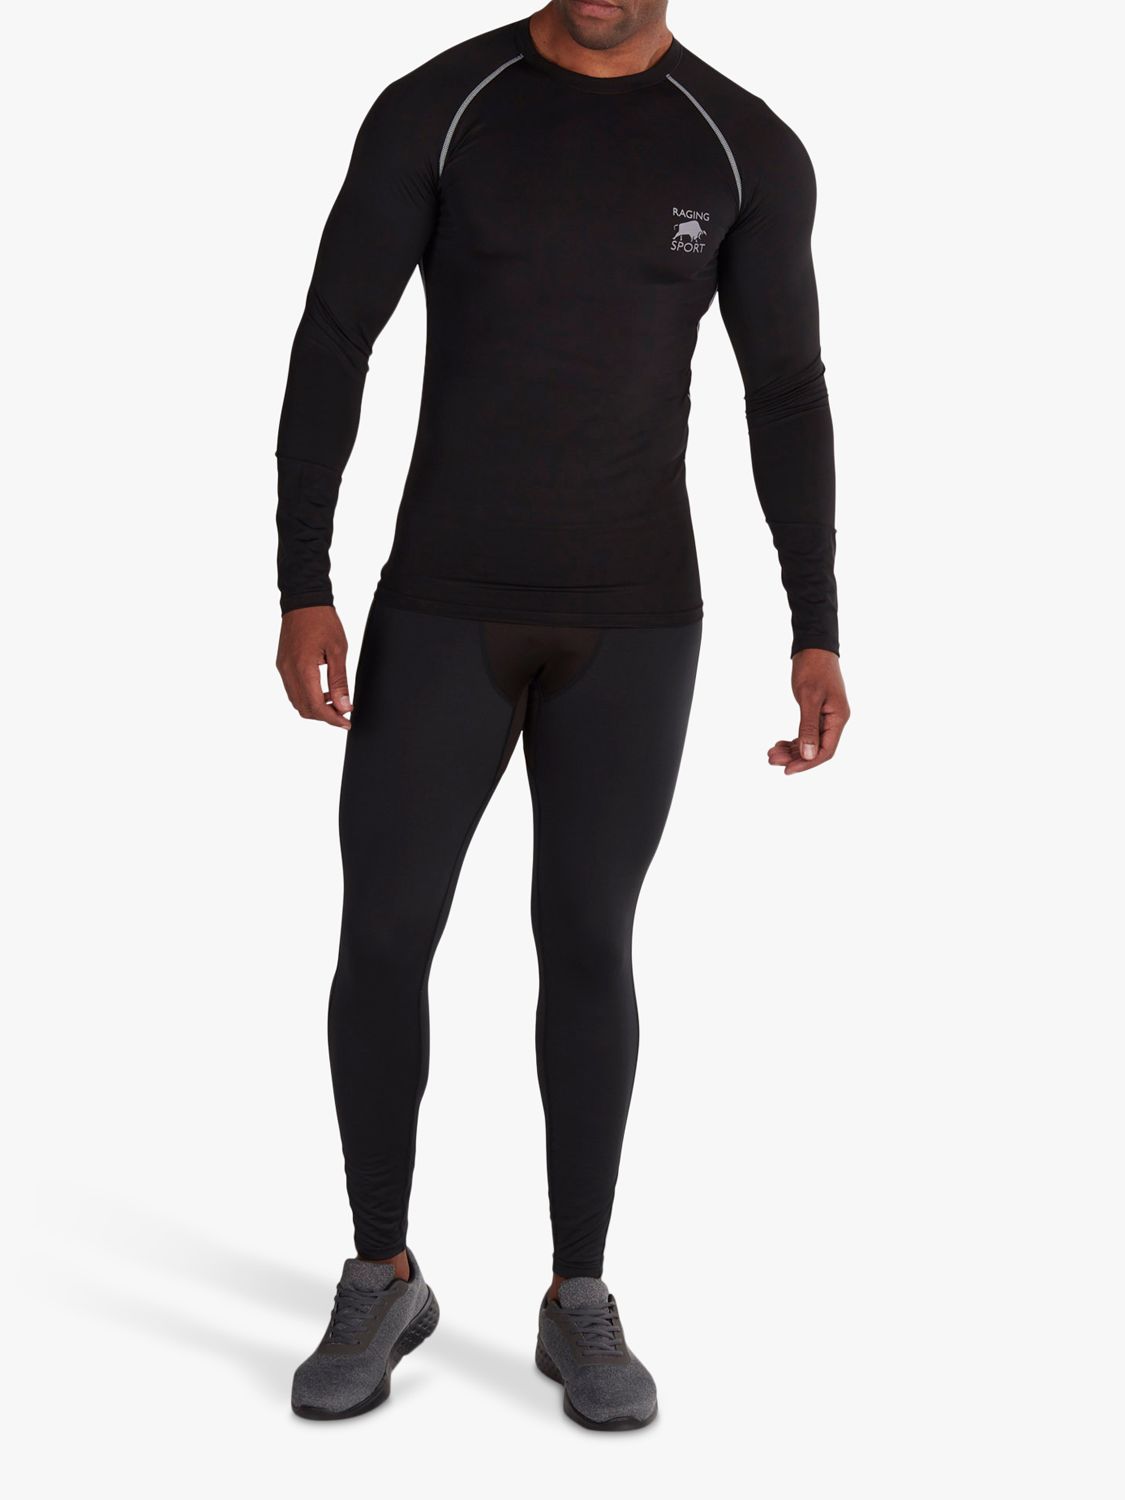 Raging Bull Base Long Sleeve Compression Top, Black, XS